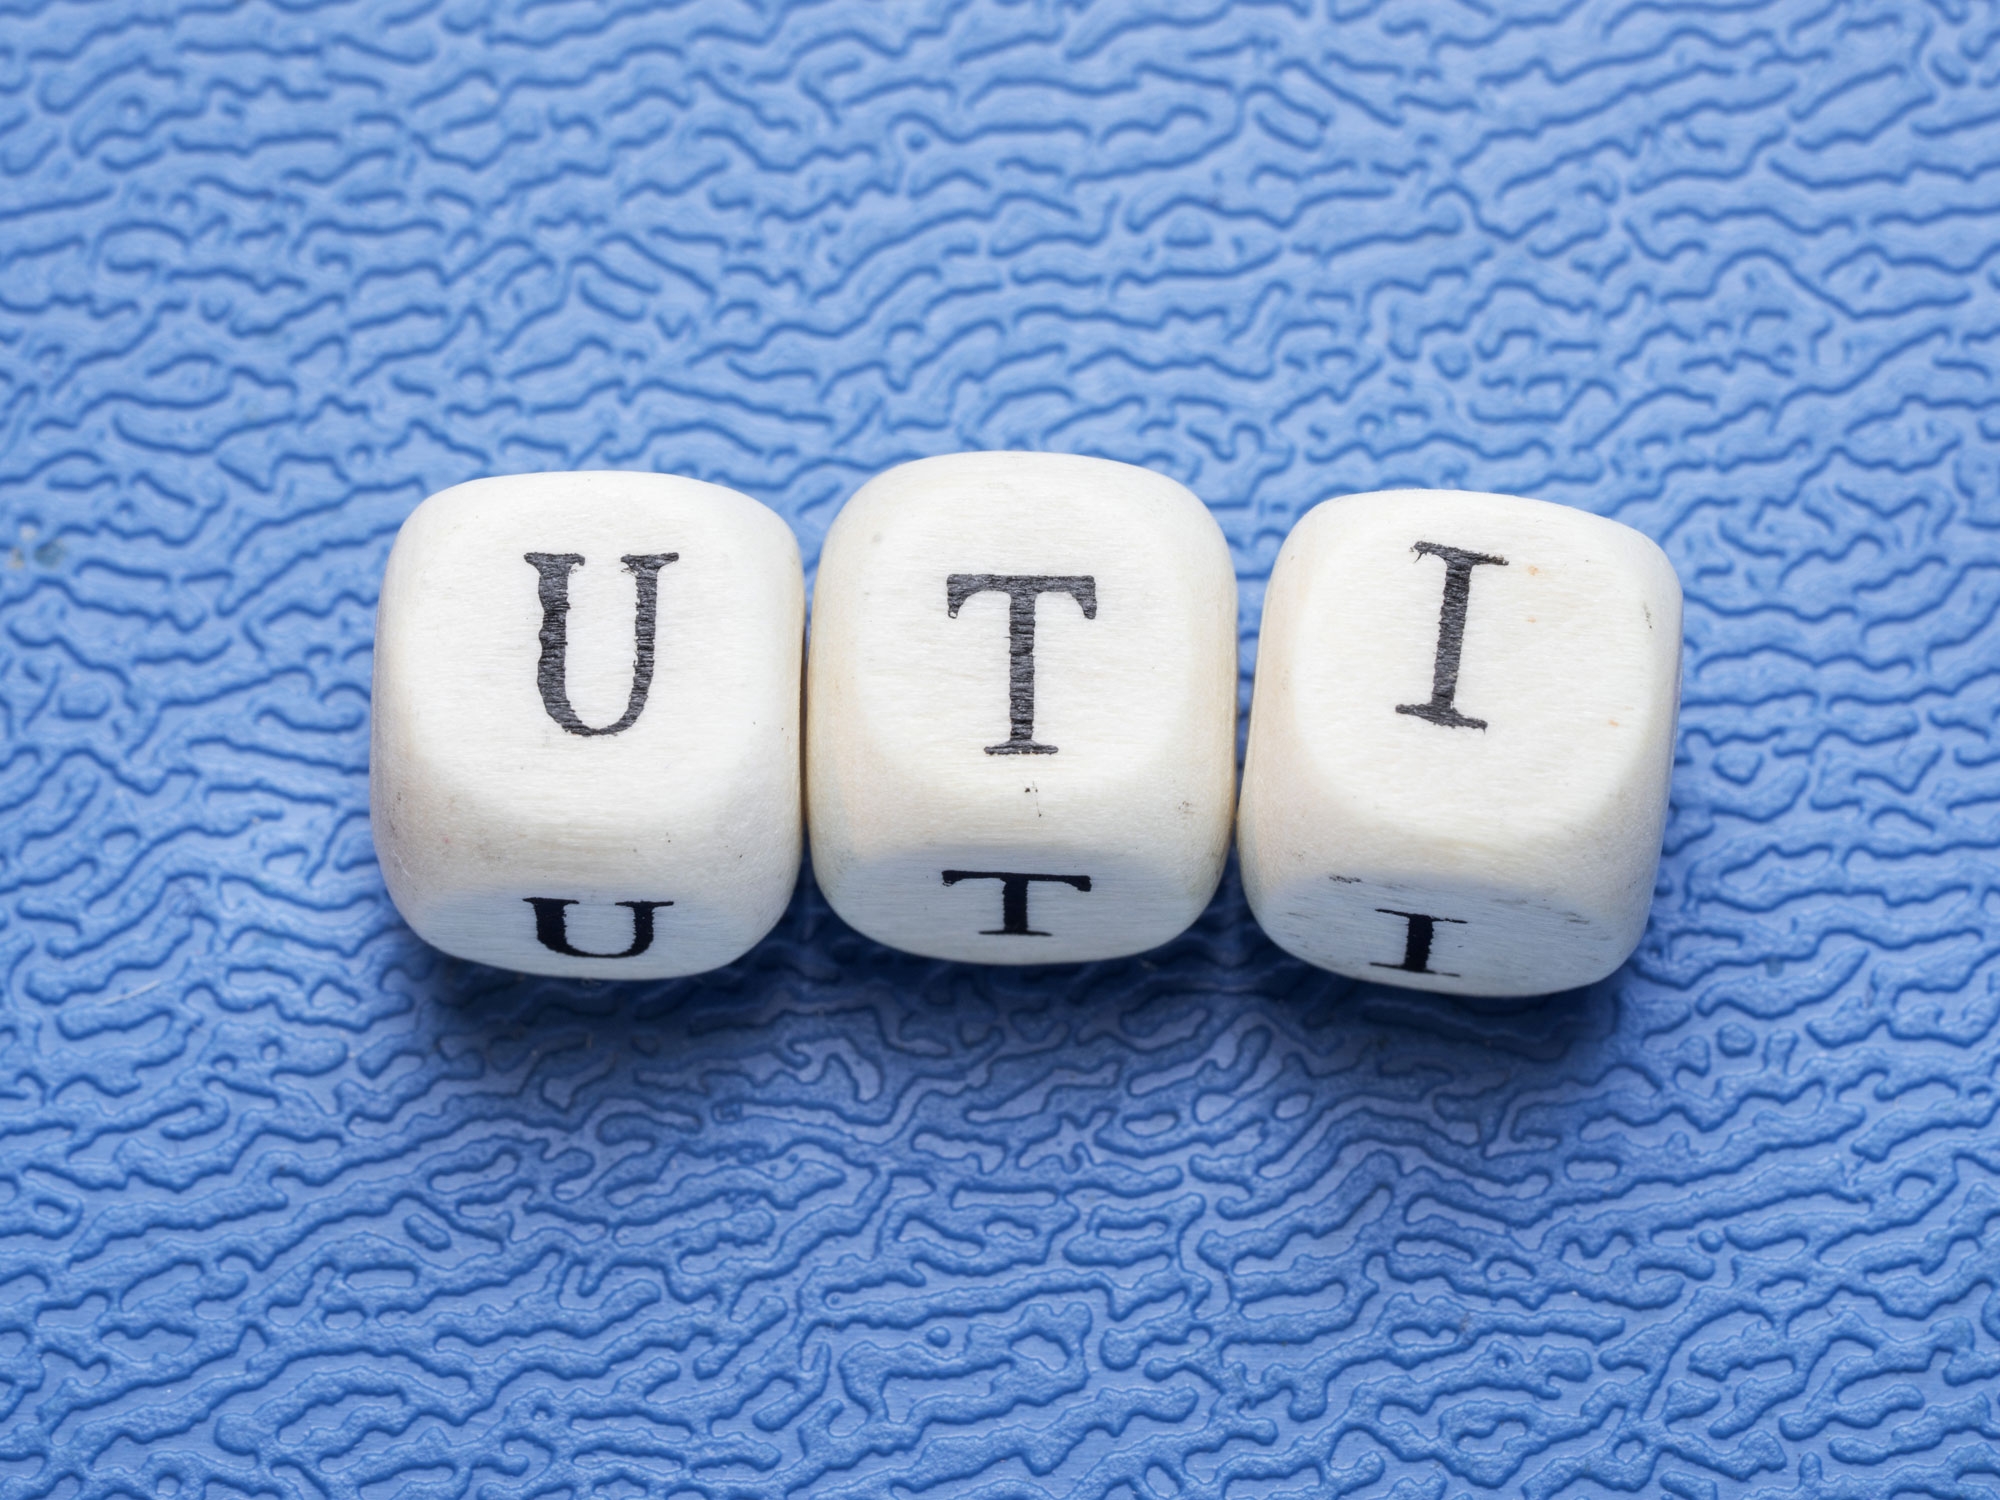 UTI relief from a surprising source